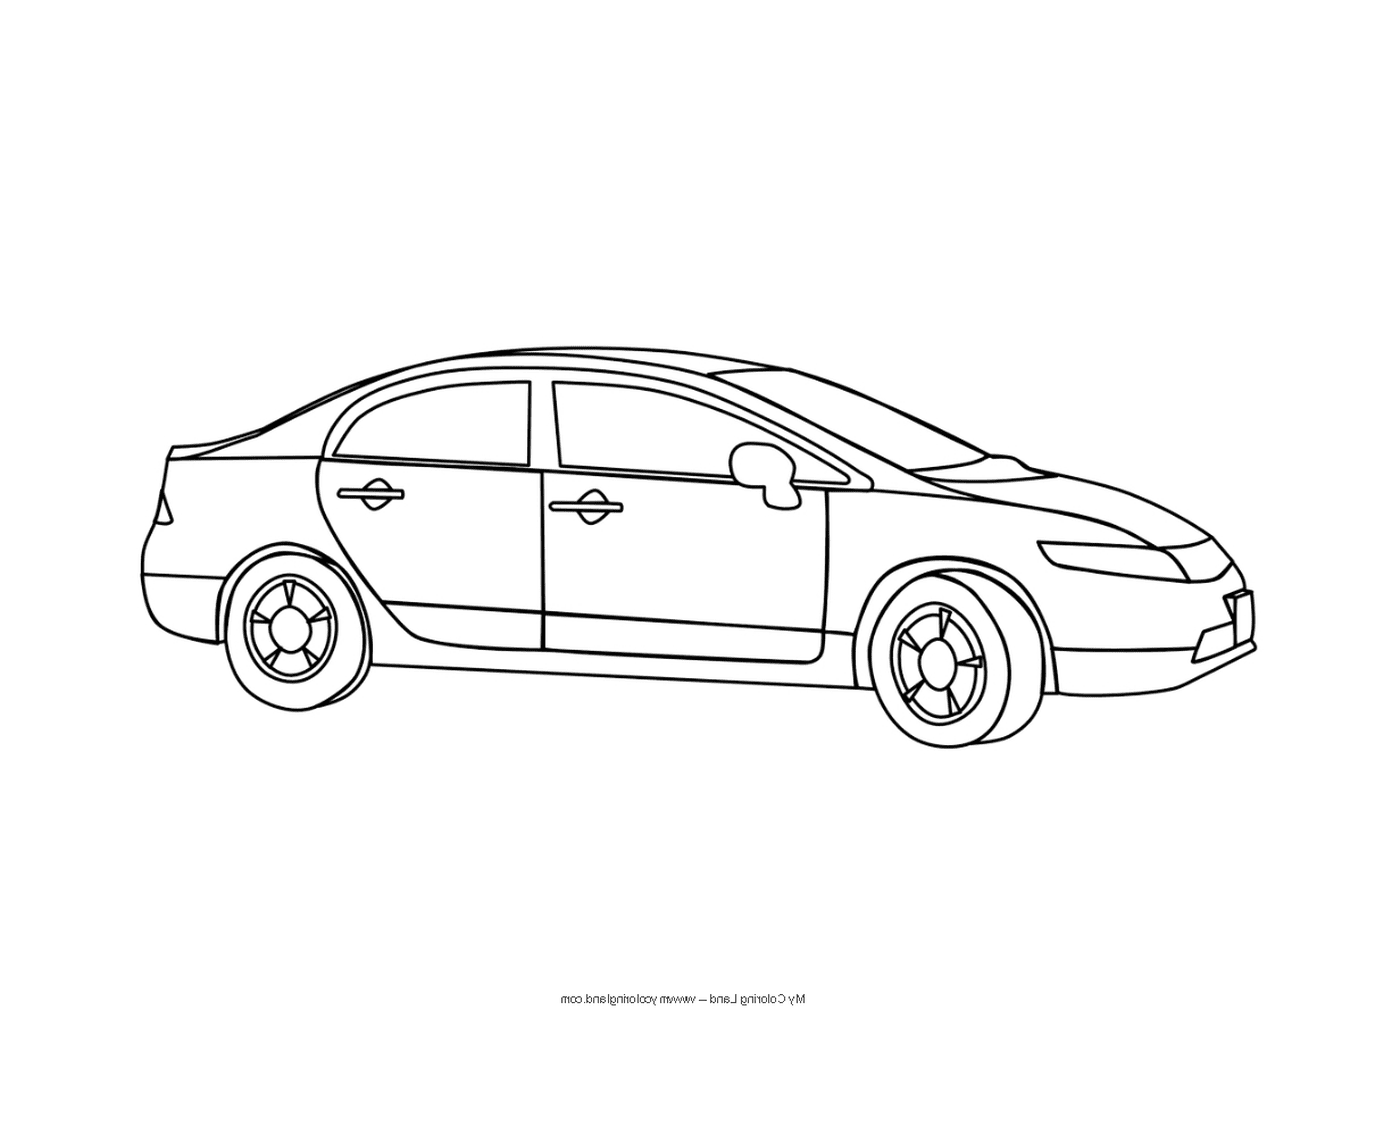  A black and white car 